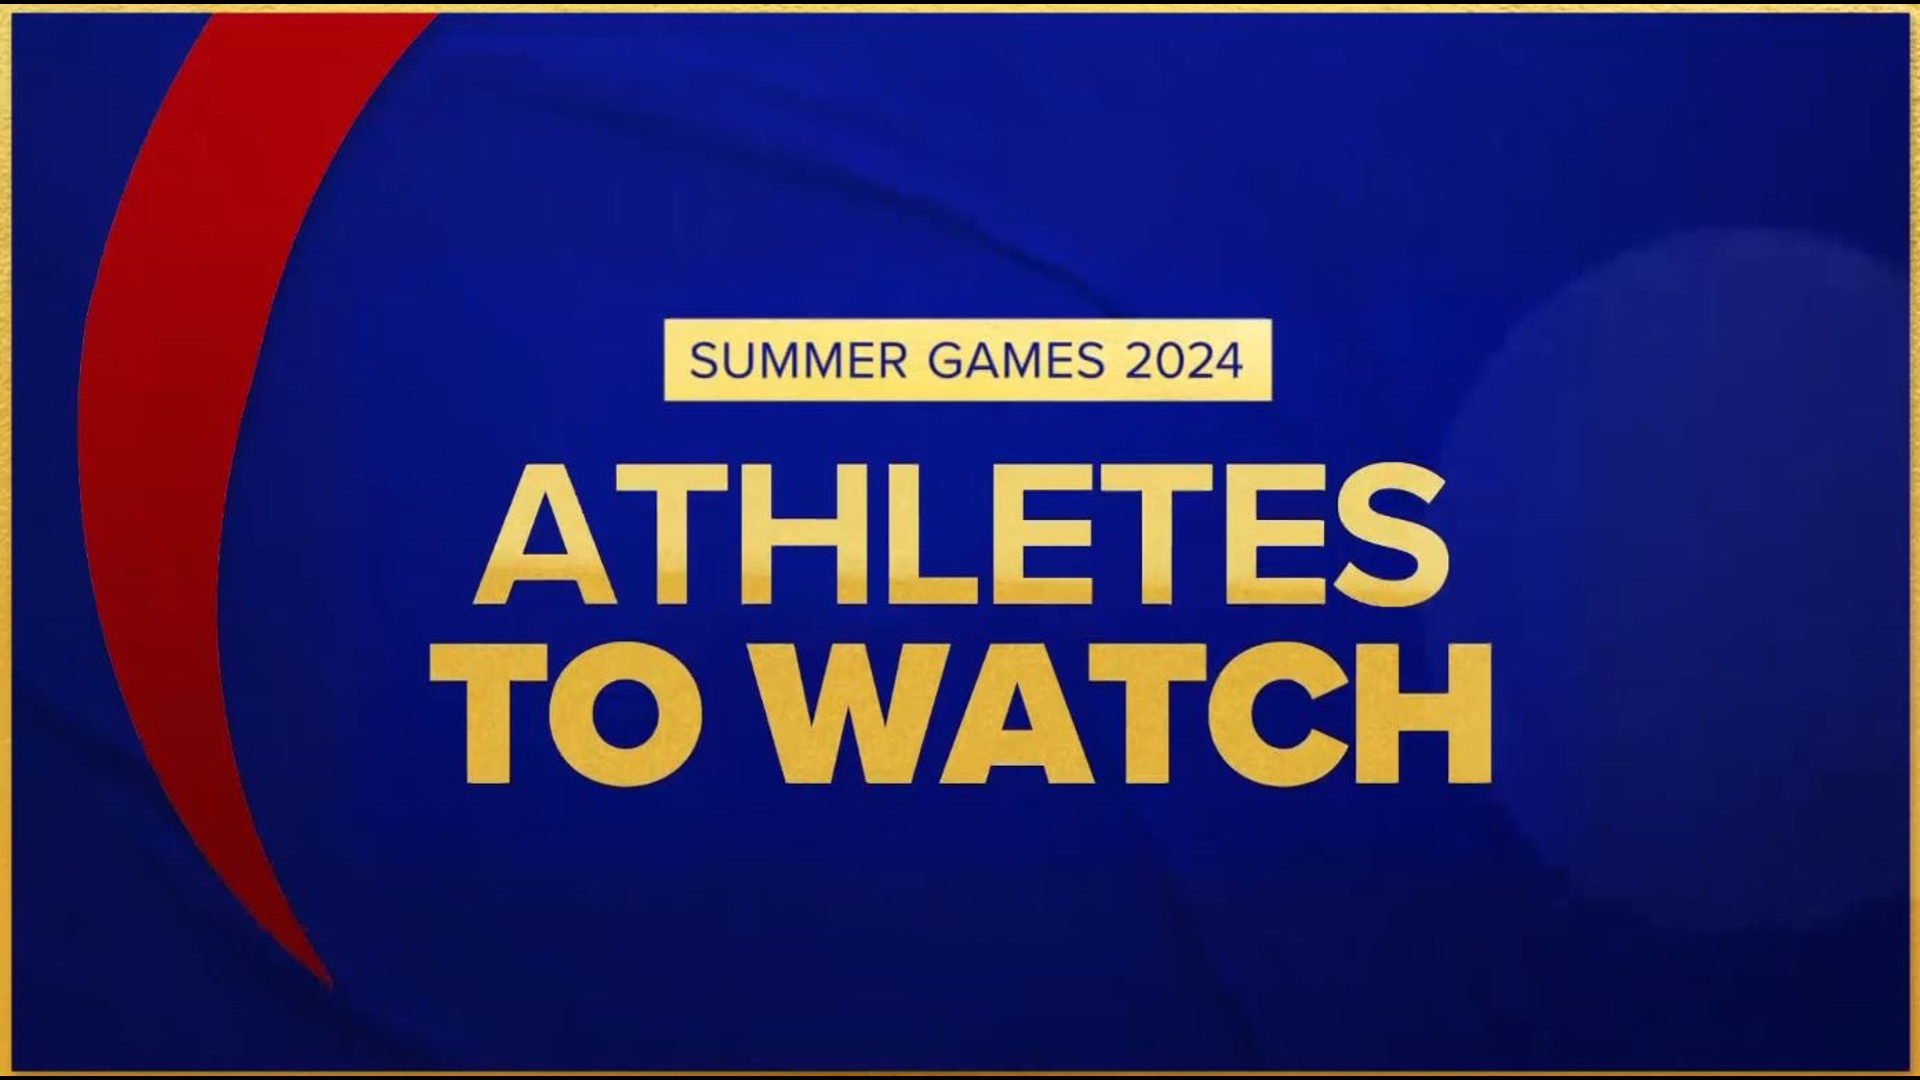 There are plenty of events to watch during the 2024 Summer Games in Paris. We put together a list of some of the athletes and teams you should watch compete.